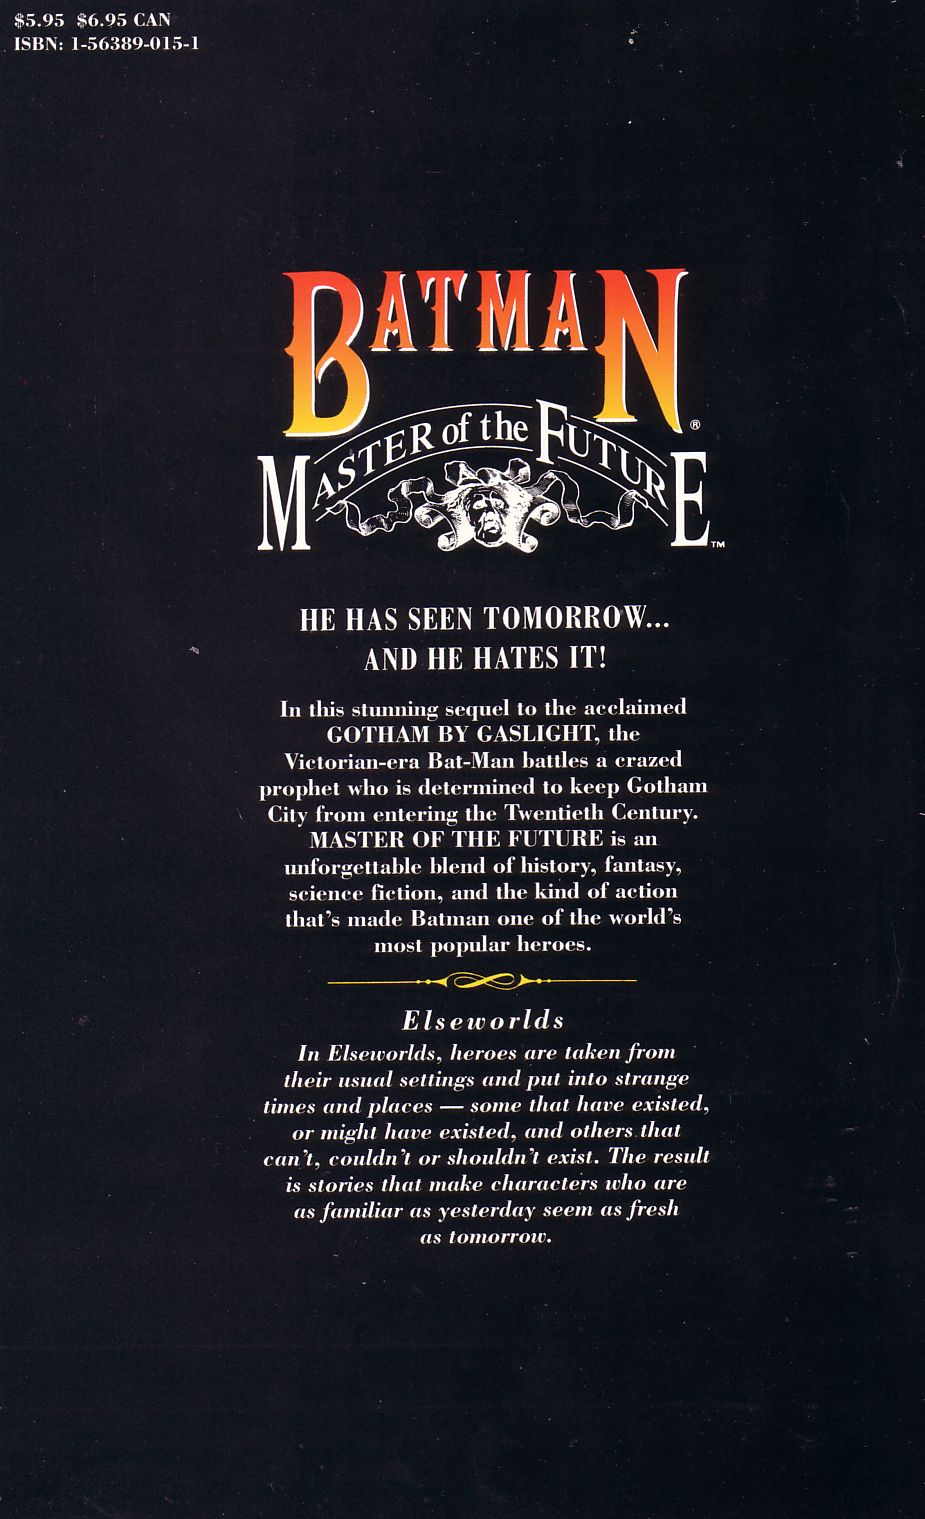 Read online Batman: Master of the Future comic -  Issue # Full - 68